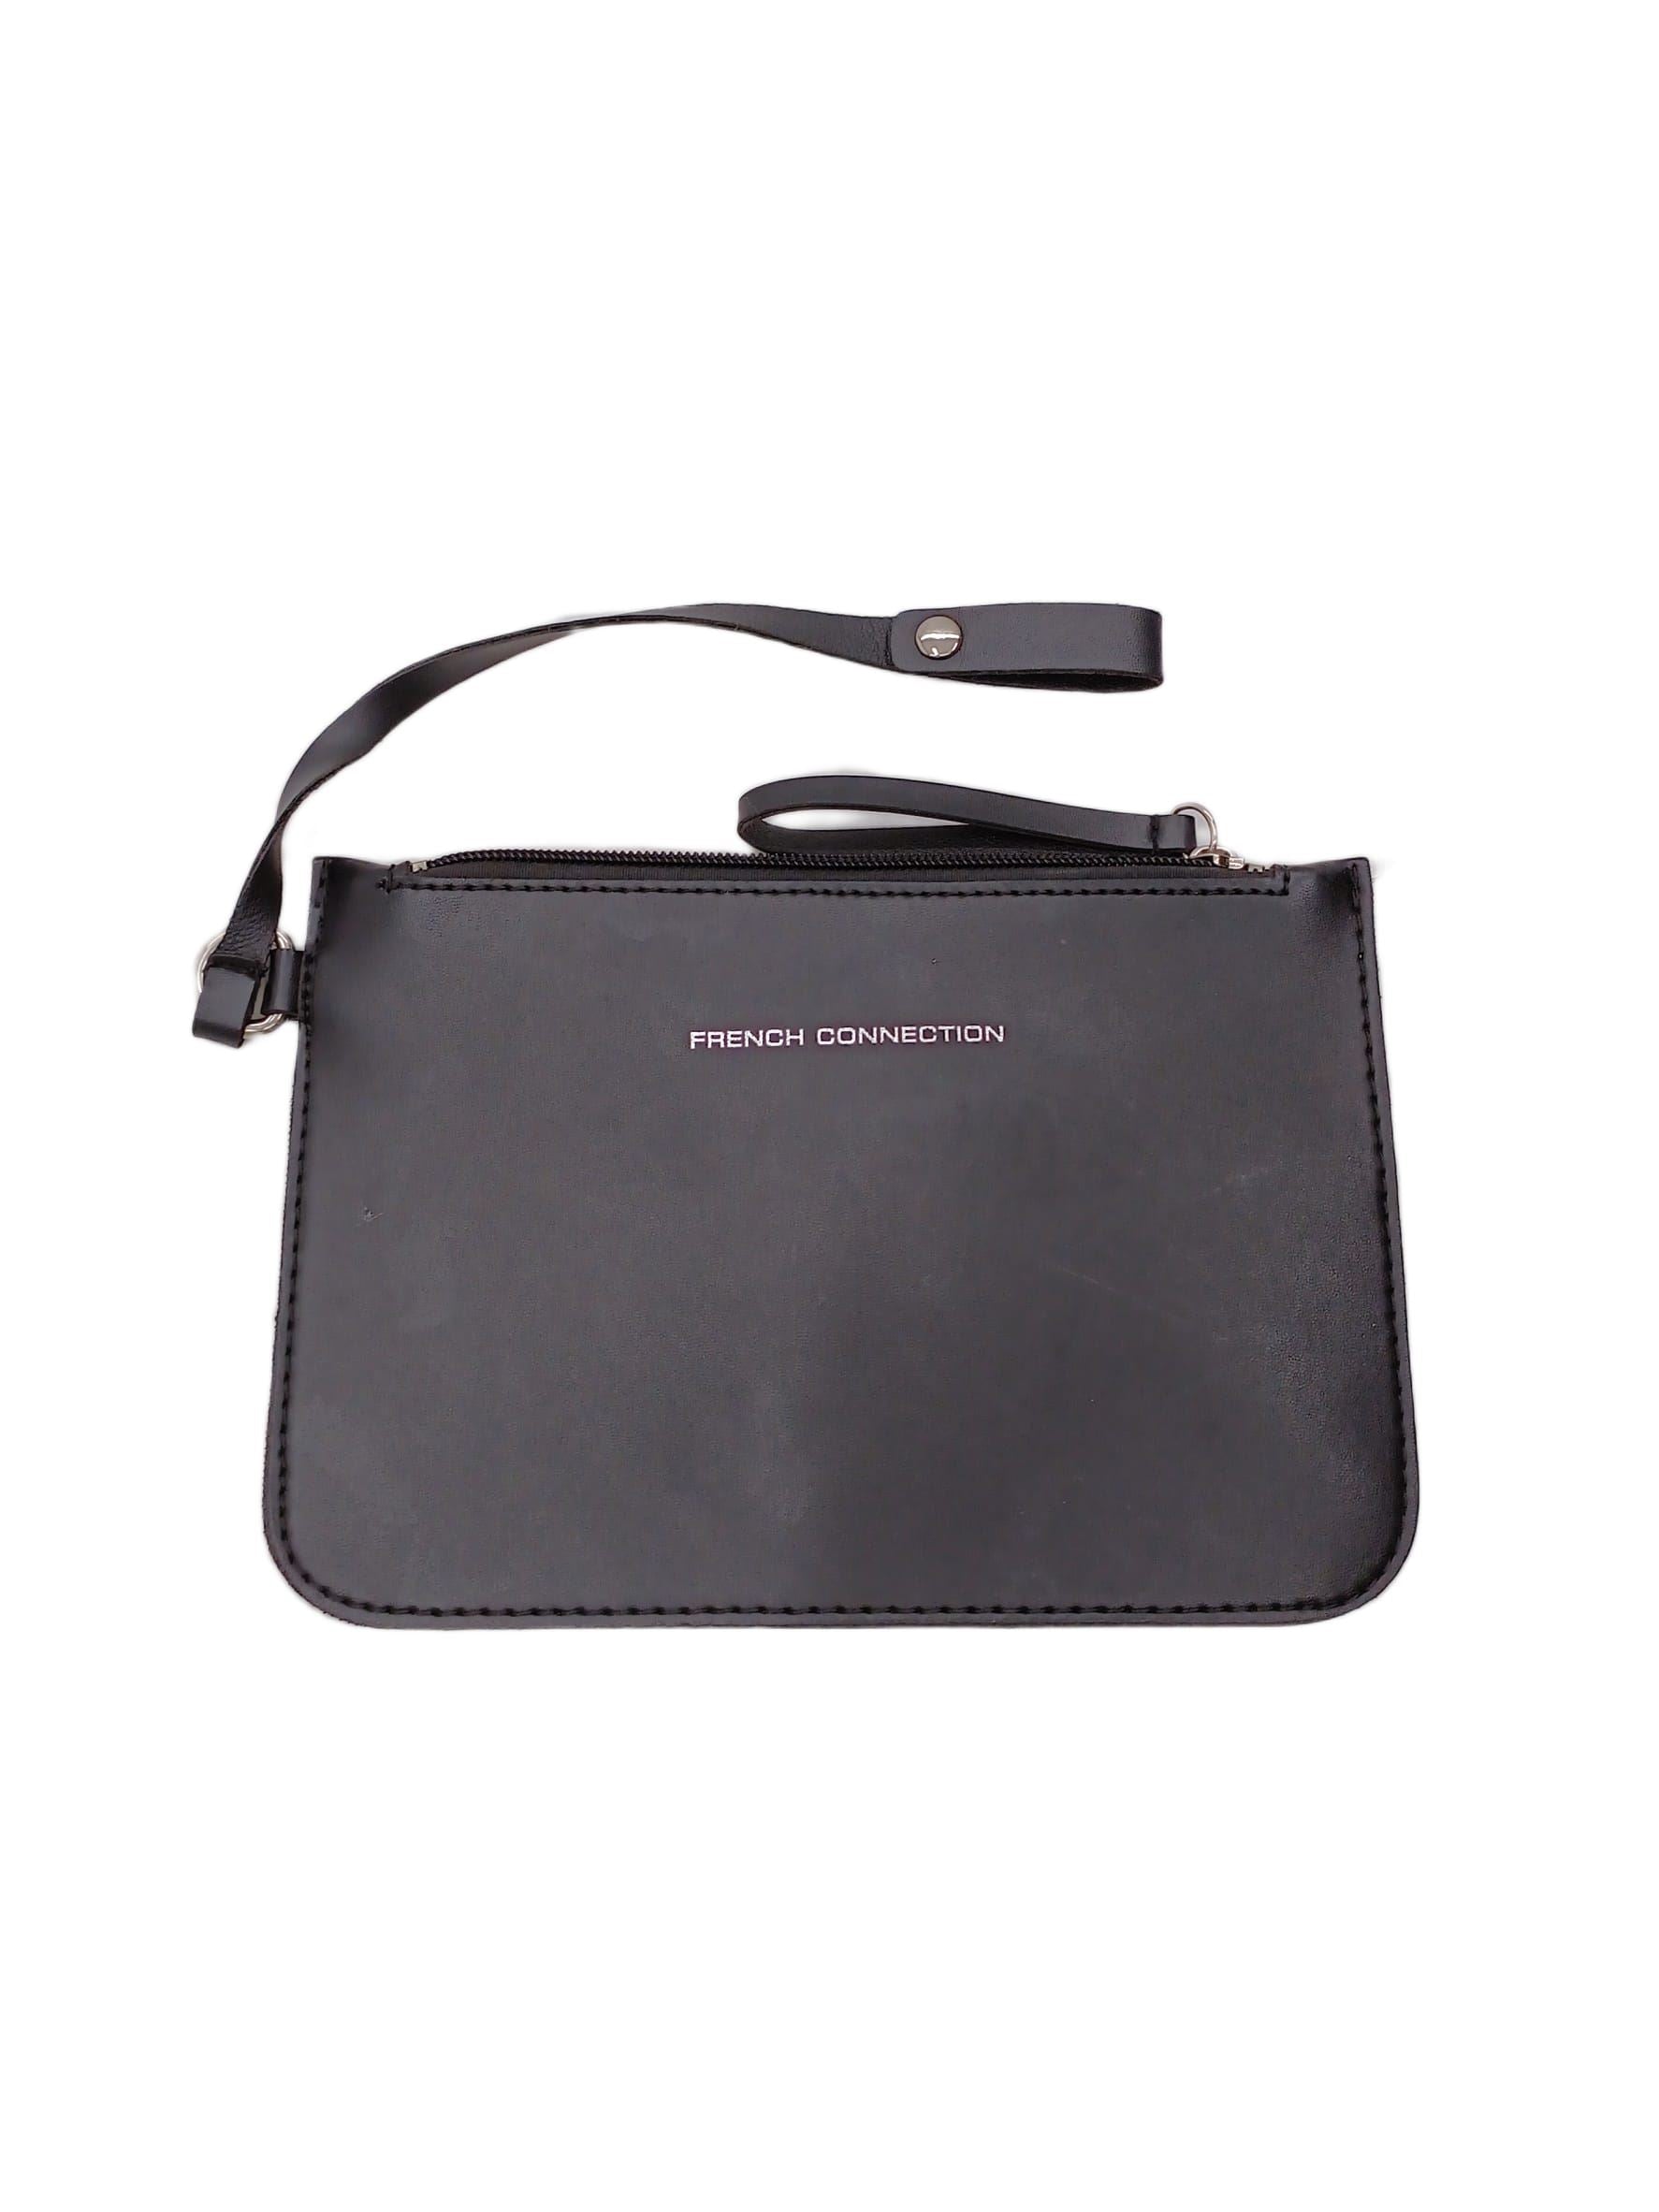 French Connection Charlotte Cross Body Bag, Light Moss